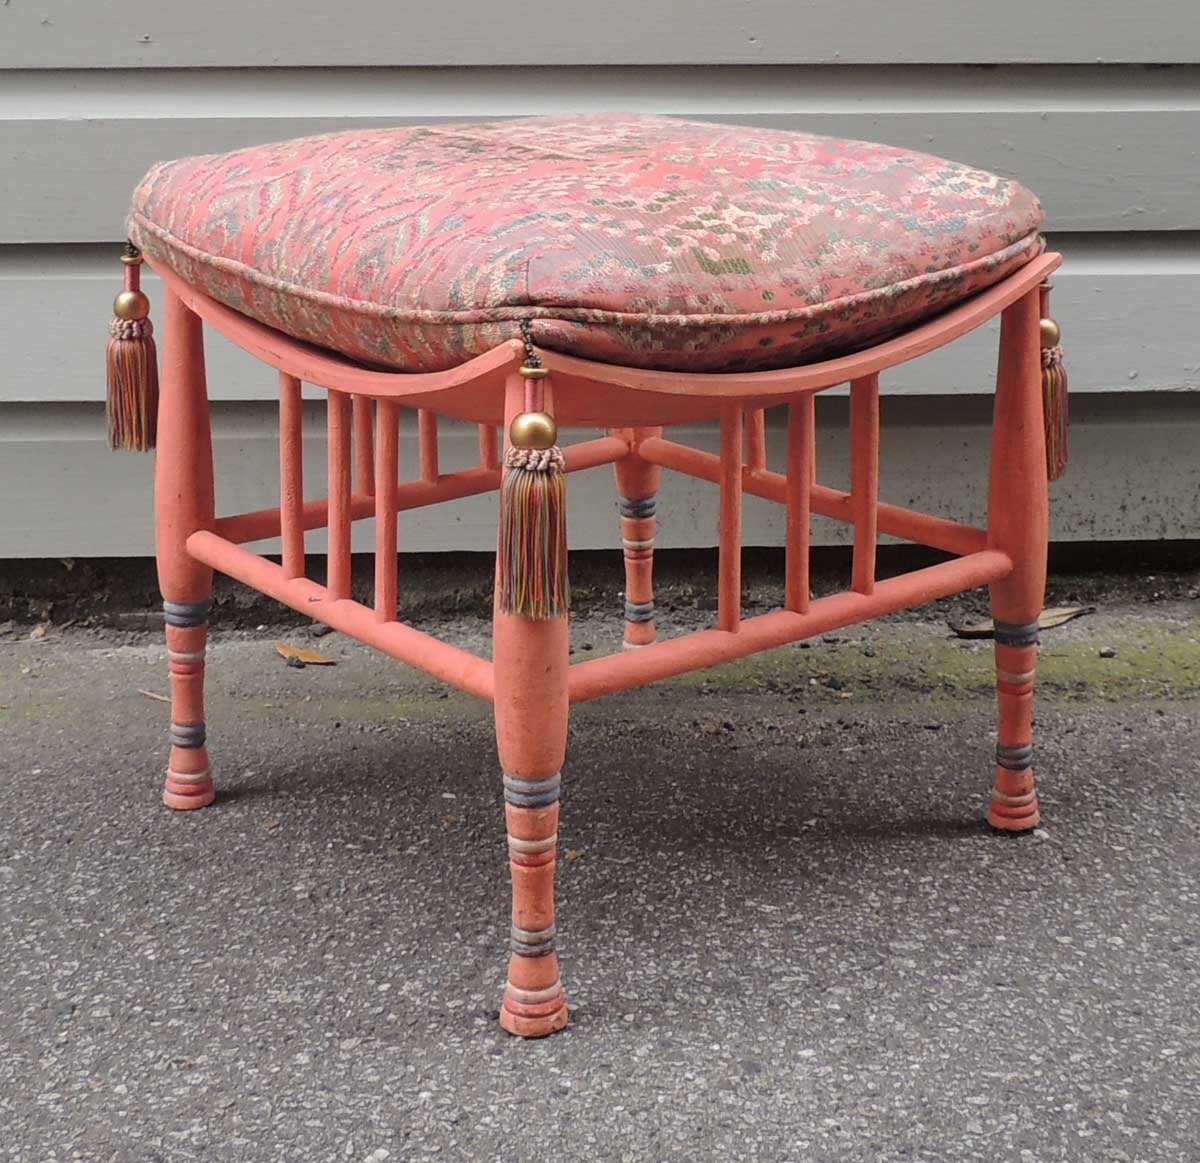 This unique stool was made in the first half of the 20th century and reflects the Egyptian style. This piece is painted a salmon pink with blue and white stripes on the legs. The cushion features similar colors with multi-color tassels at each